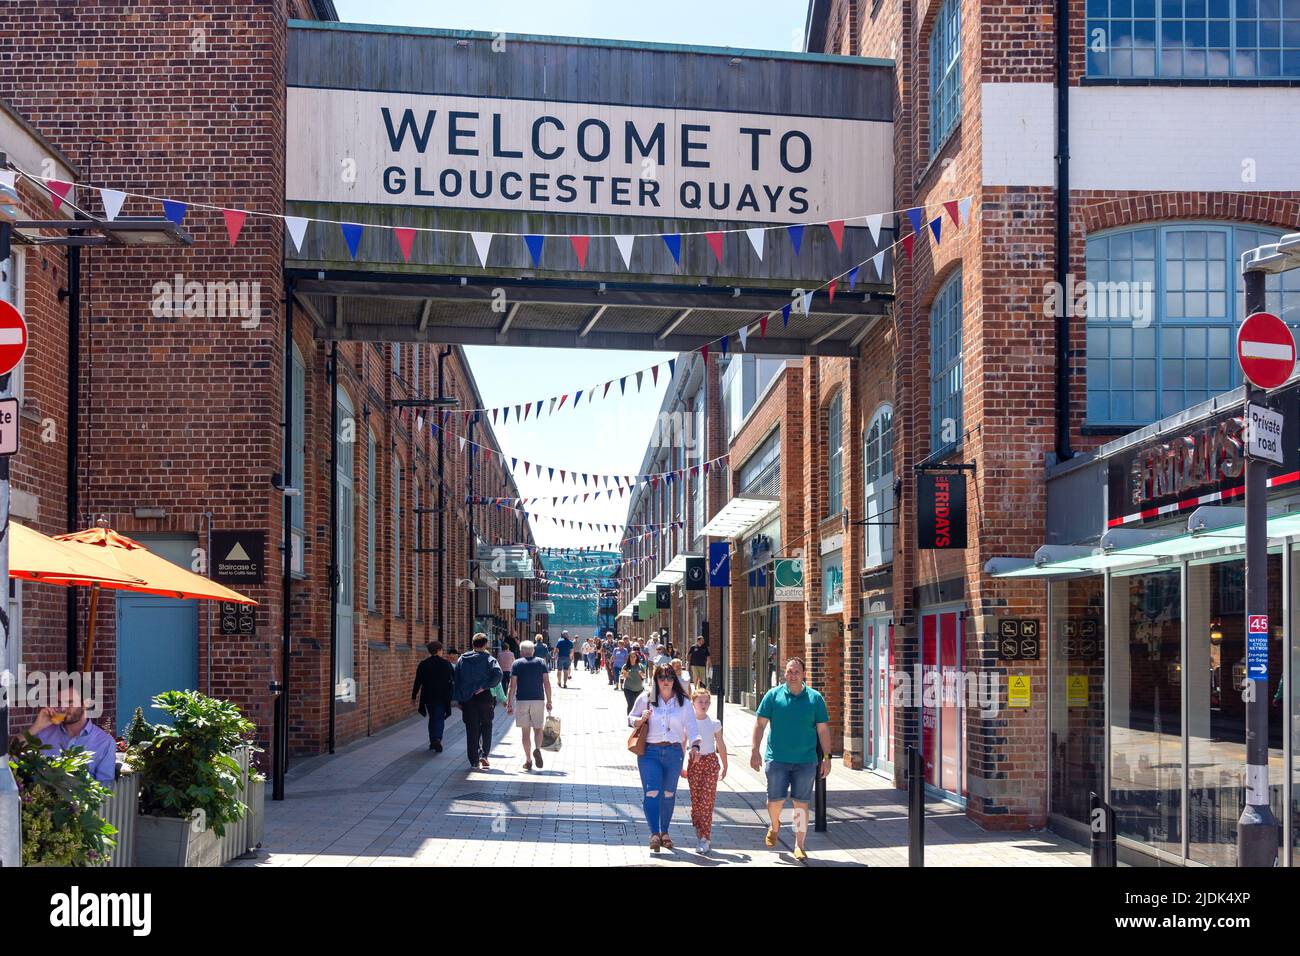 Entrance to Gloucester Quays Outlet Shopping Centre, Gloucester Docks, Gloucester, Gloucestershire, England, United Kingdom Stock Photo